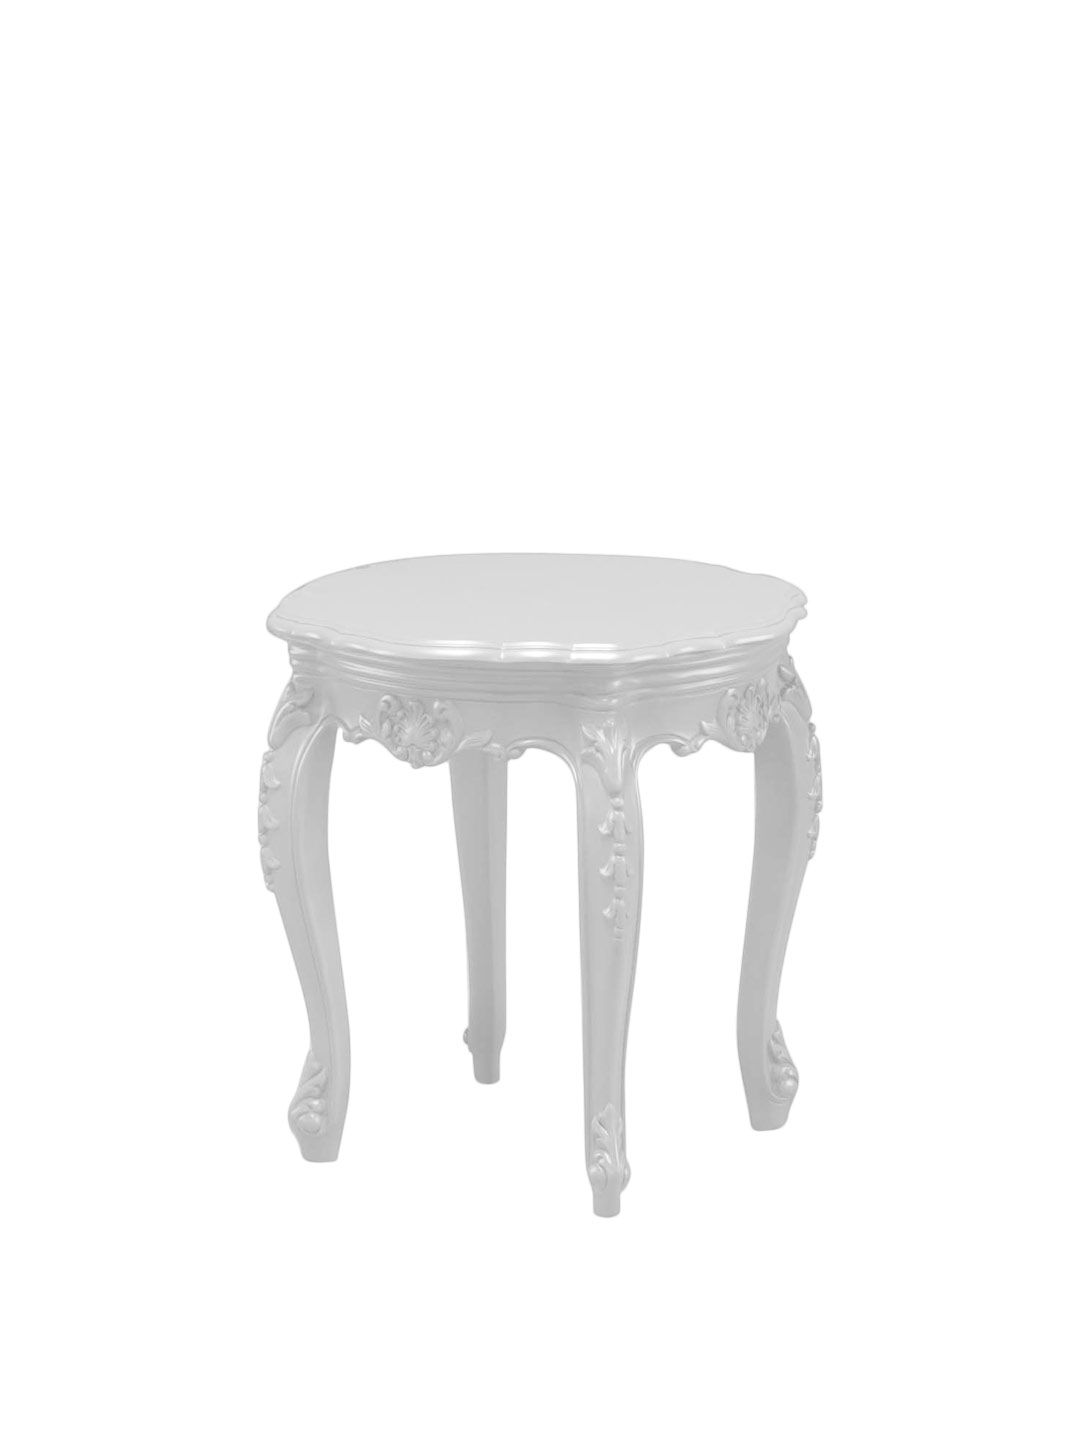 white outdoor side table products and accent polart kitchen pulls ikea tables living room pond lily lamp worlds away round square tablecloth small glass corner bass drum pedal